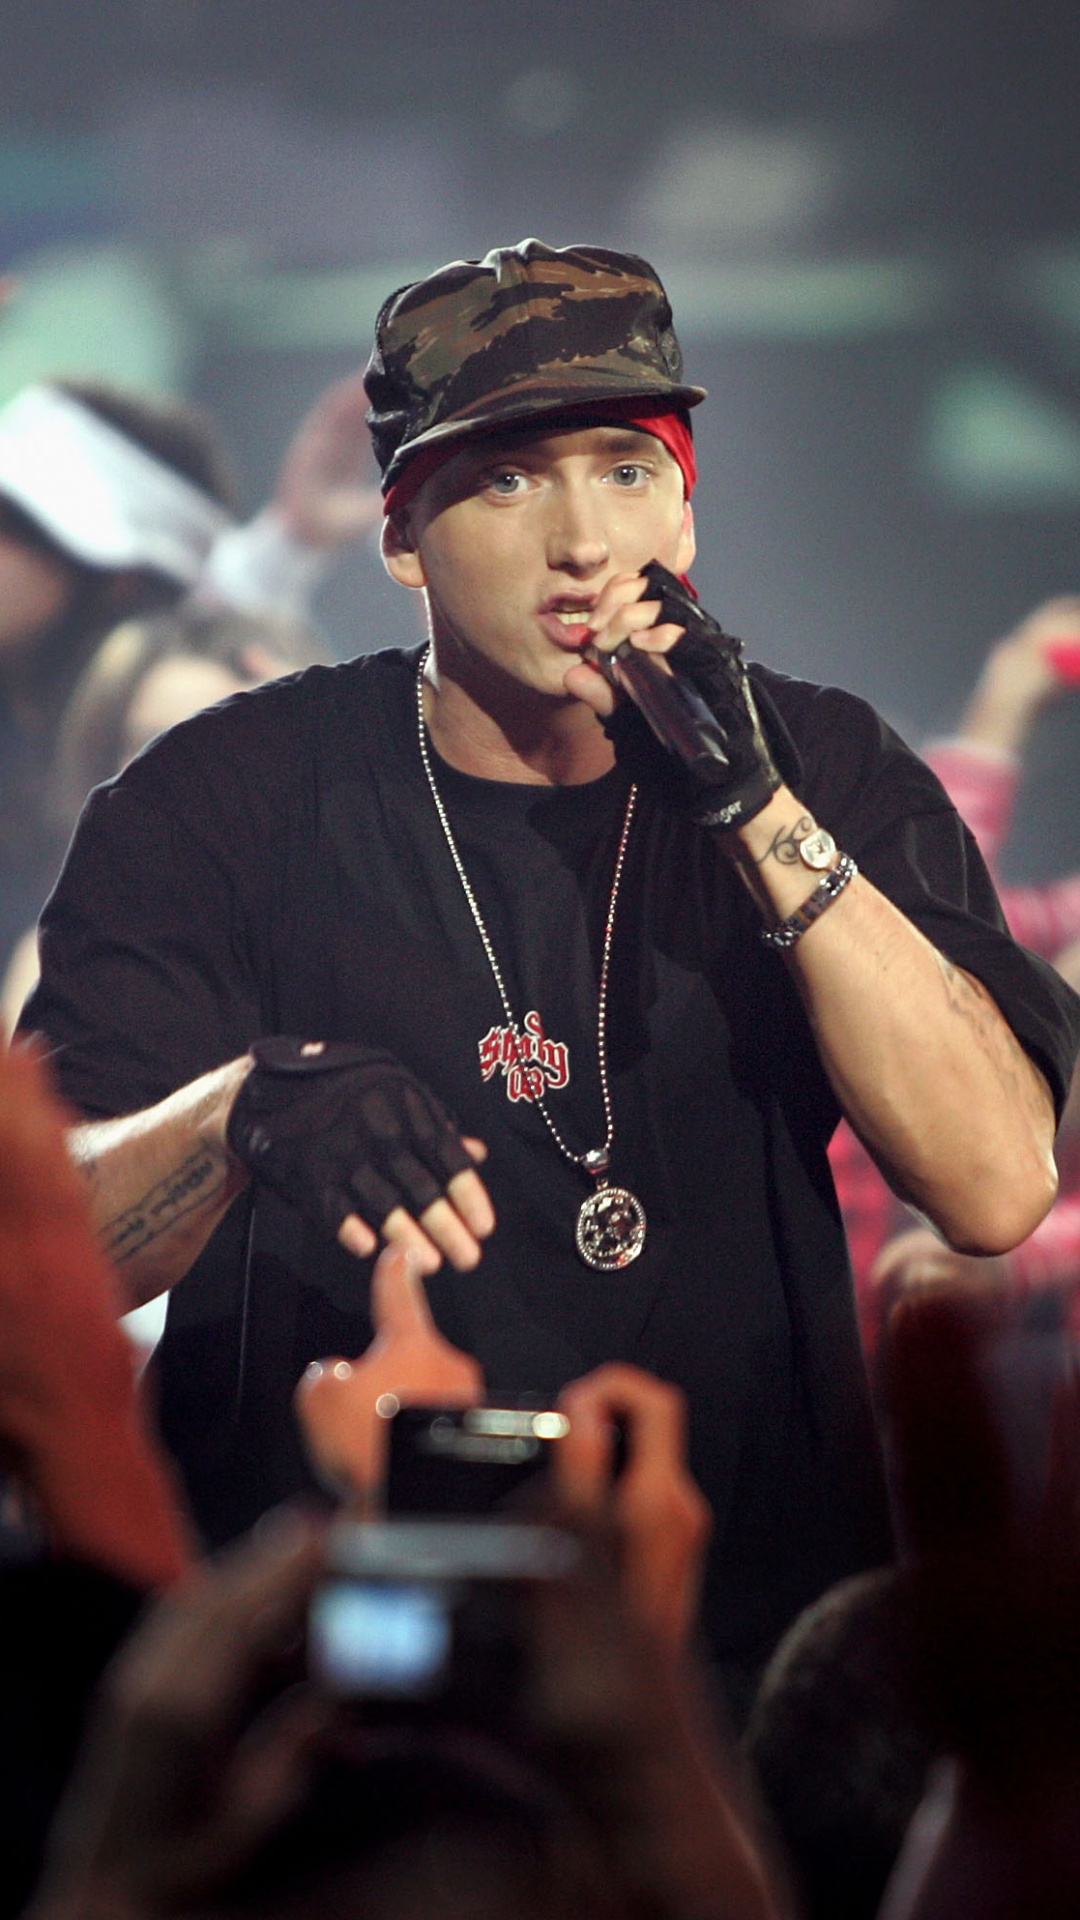 Eminem: Made history in hip-hop and in all of popular music. 1080x1920 Full HD Background.